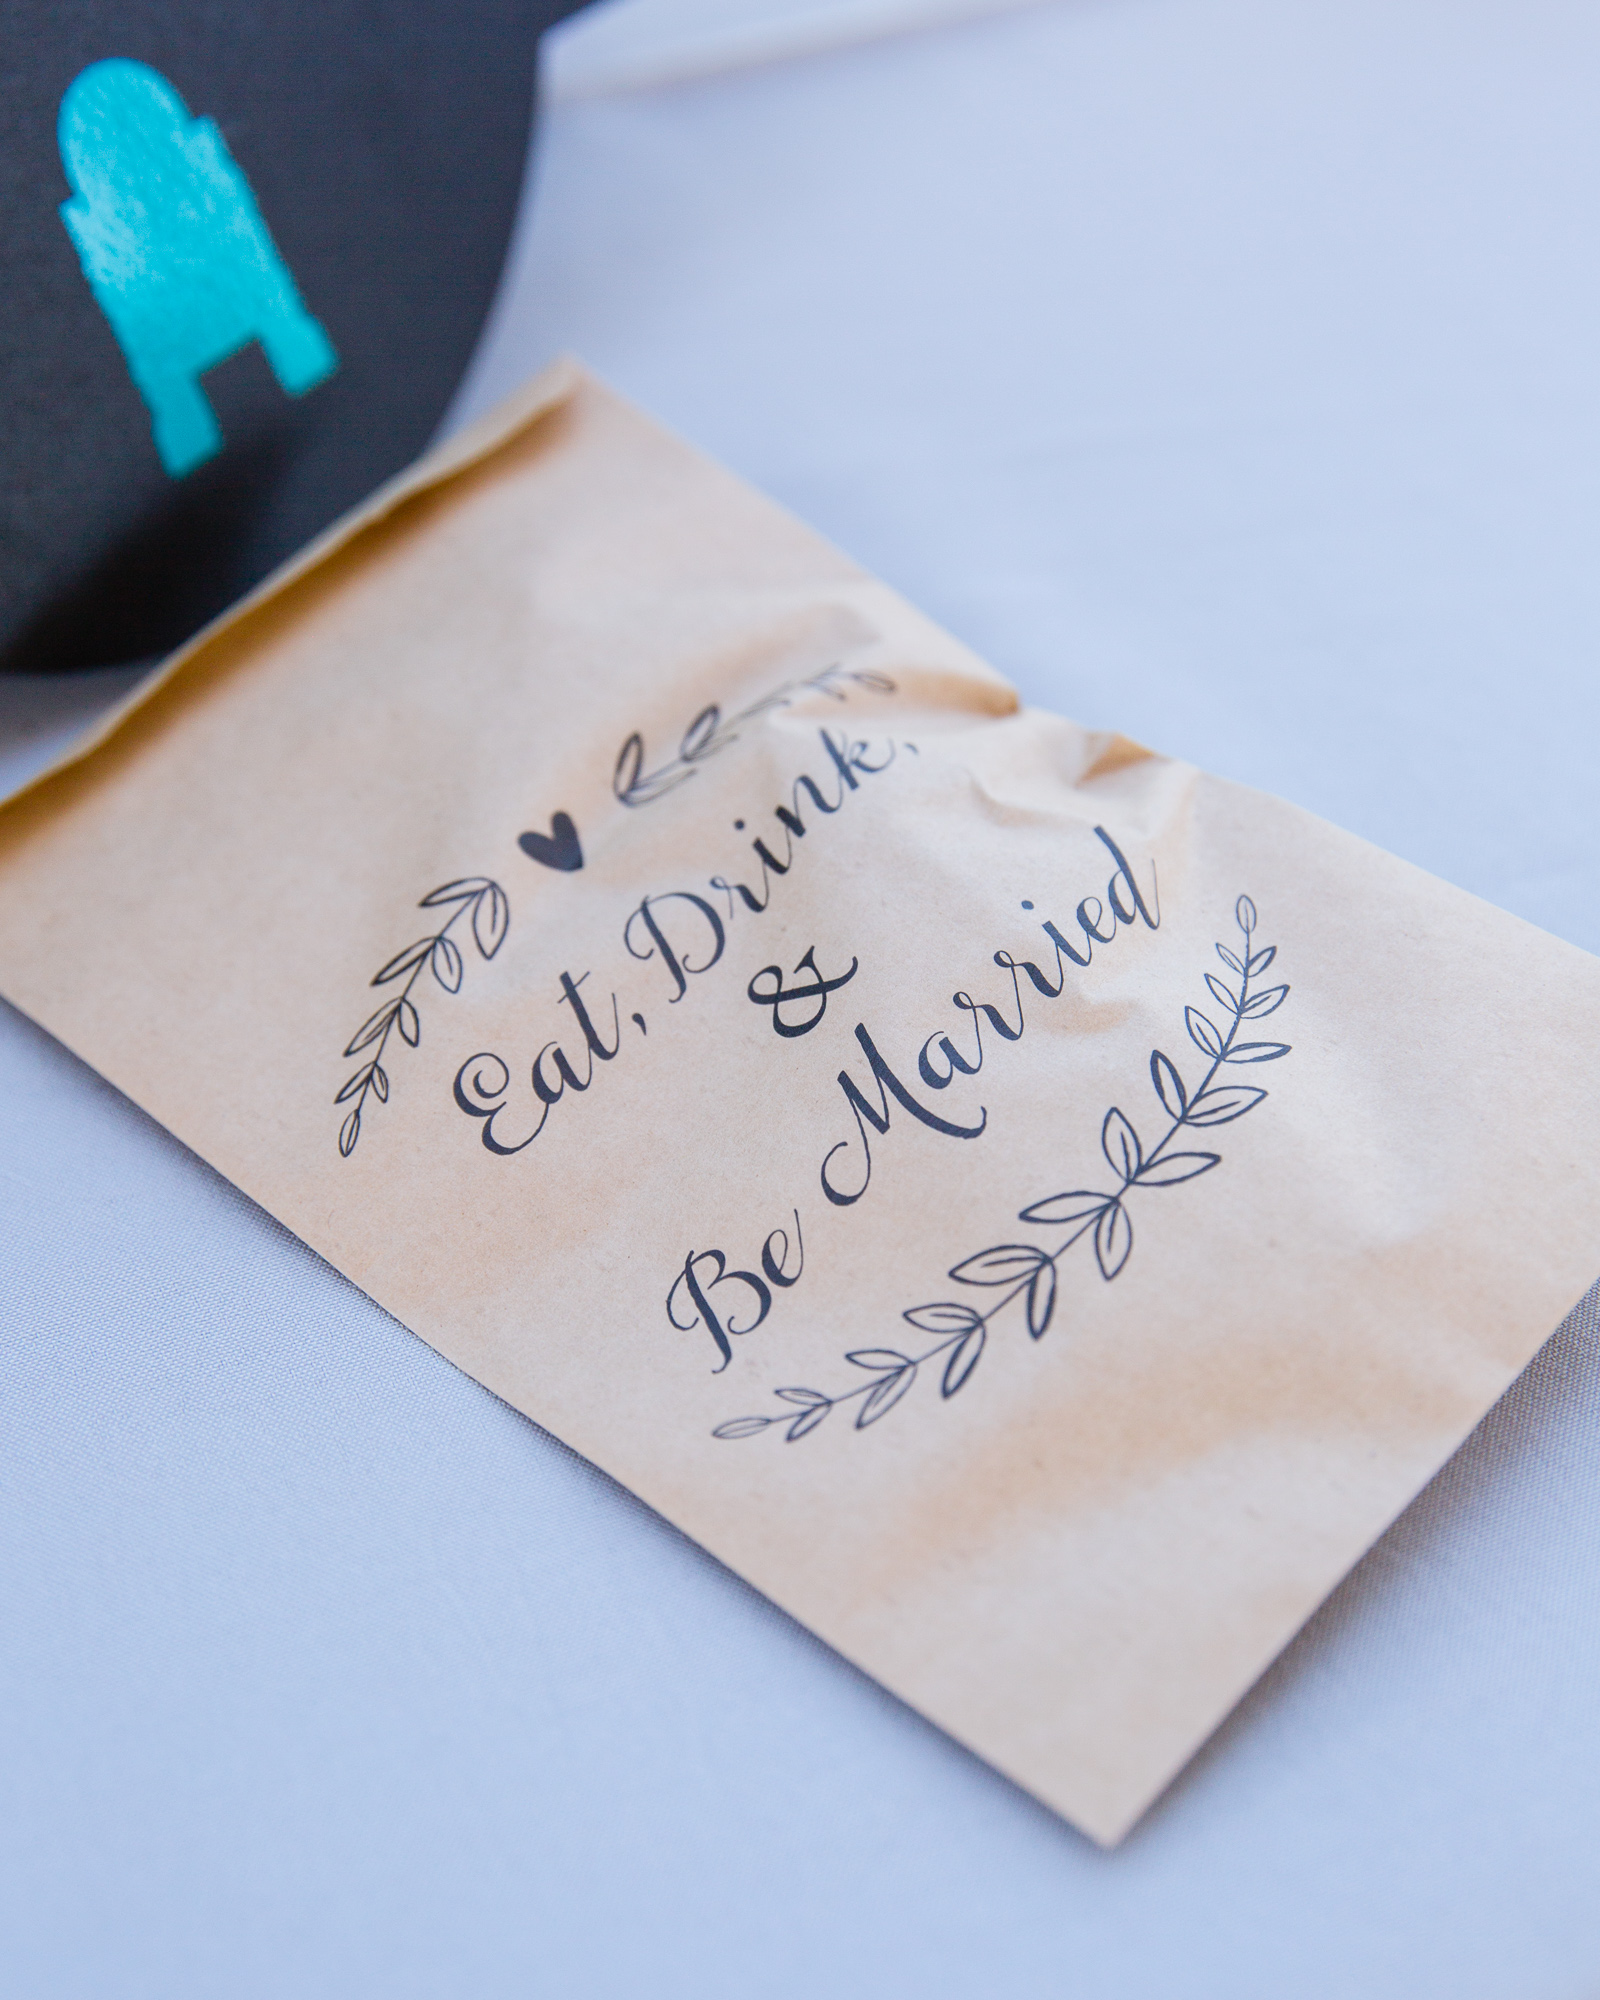 Eat Drink and Be Married kraft paper favor bags by Arizona wedding photographers PMA Photography.